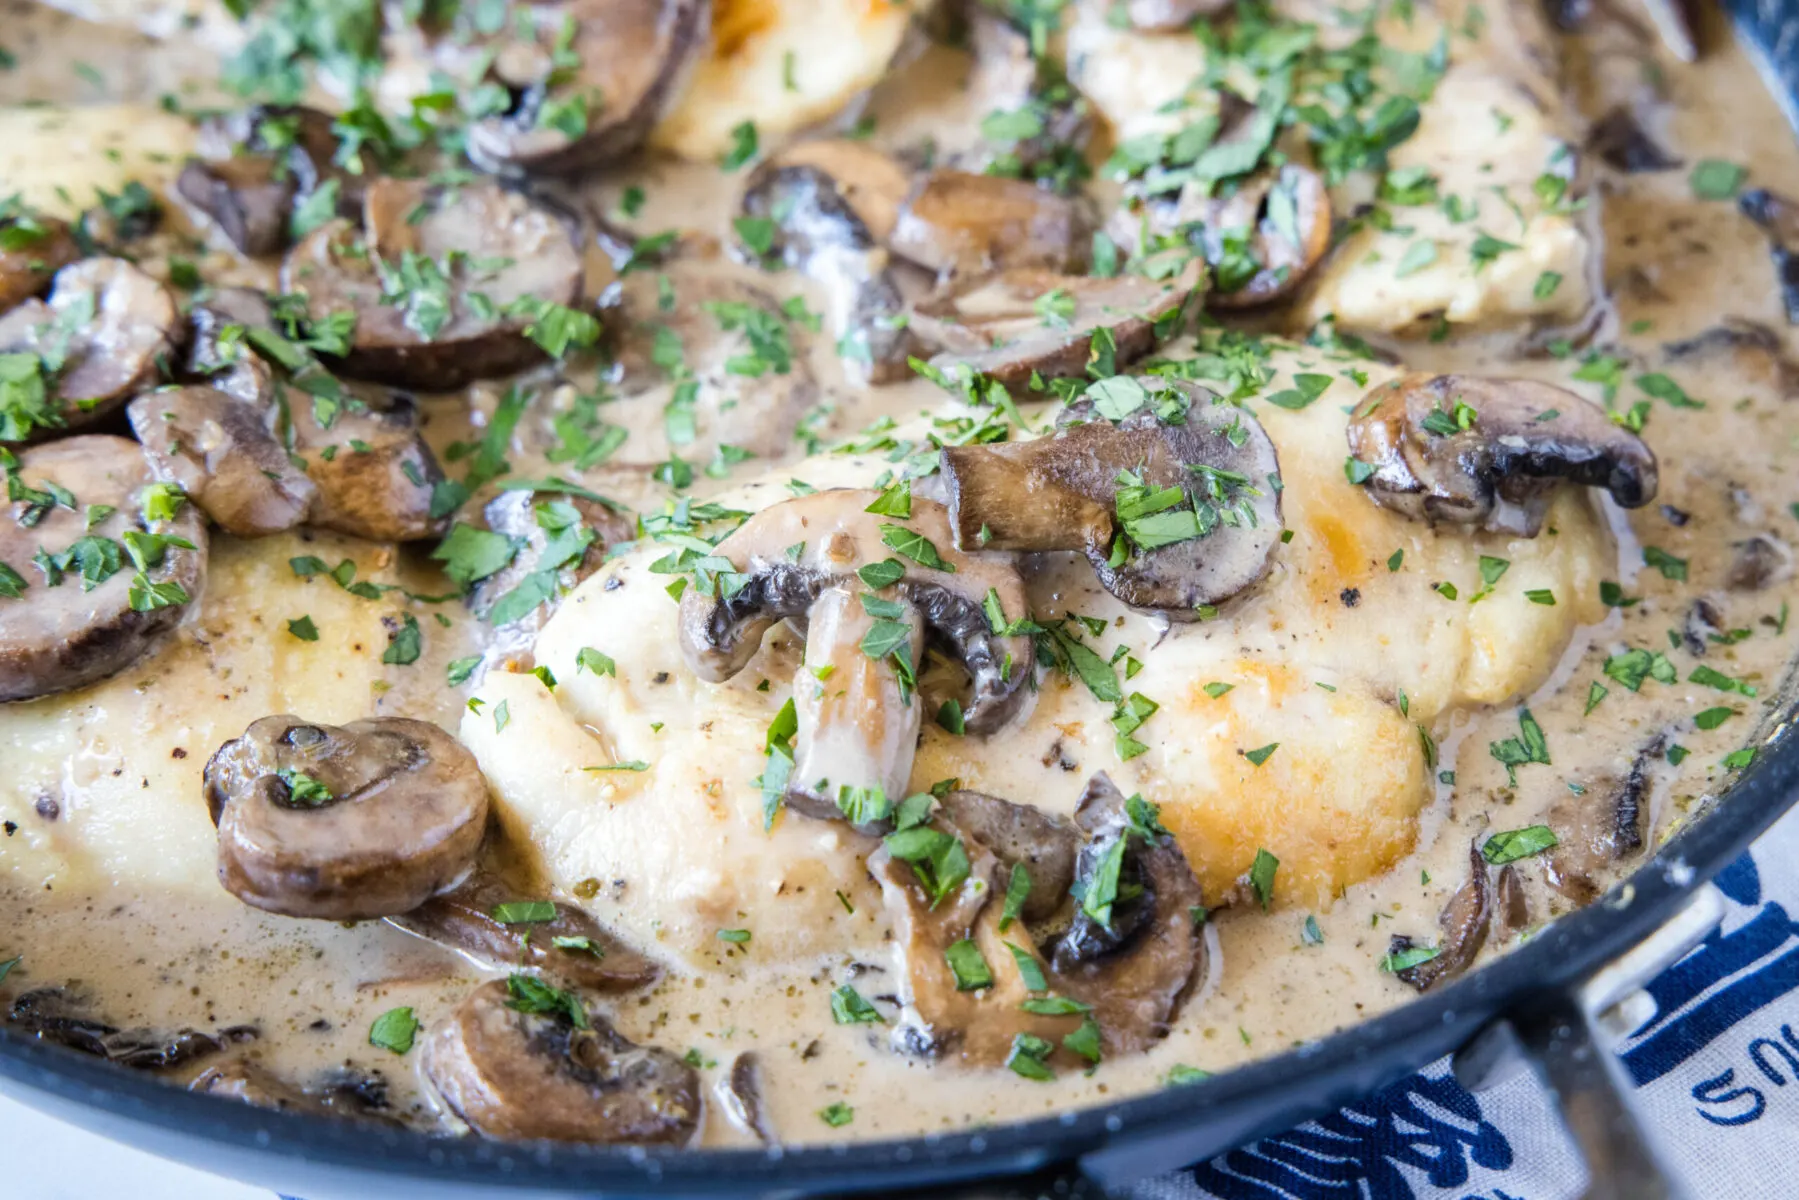 Close up of a chicken breast in a skillet covered in mushrooms, parsley, and sauce